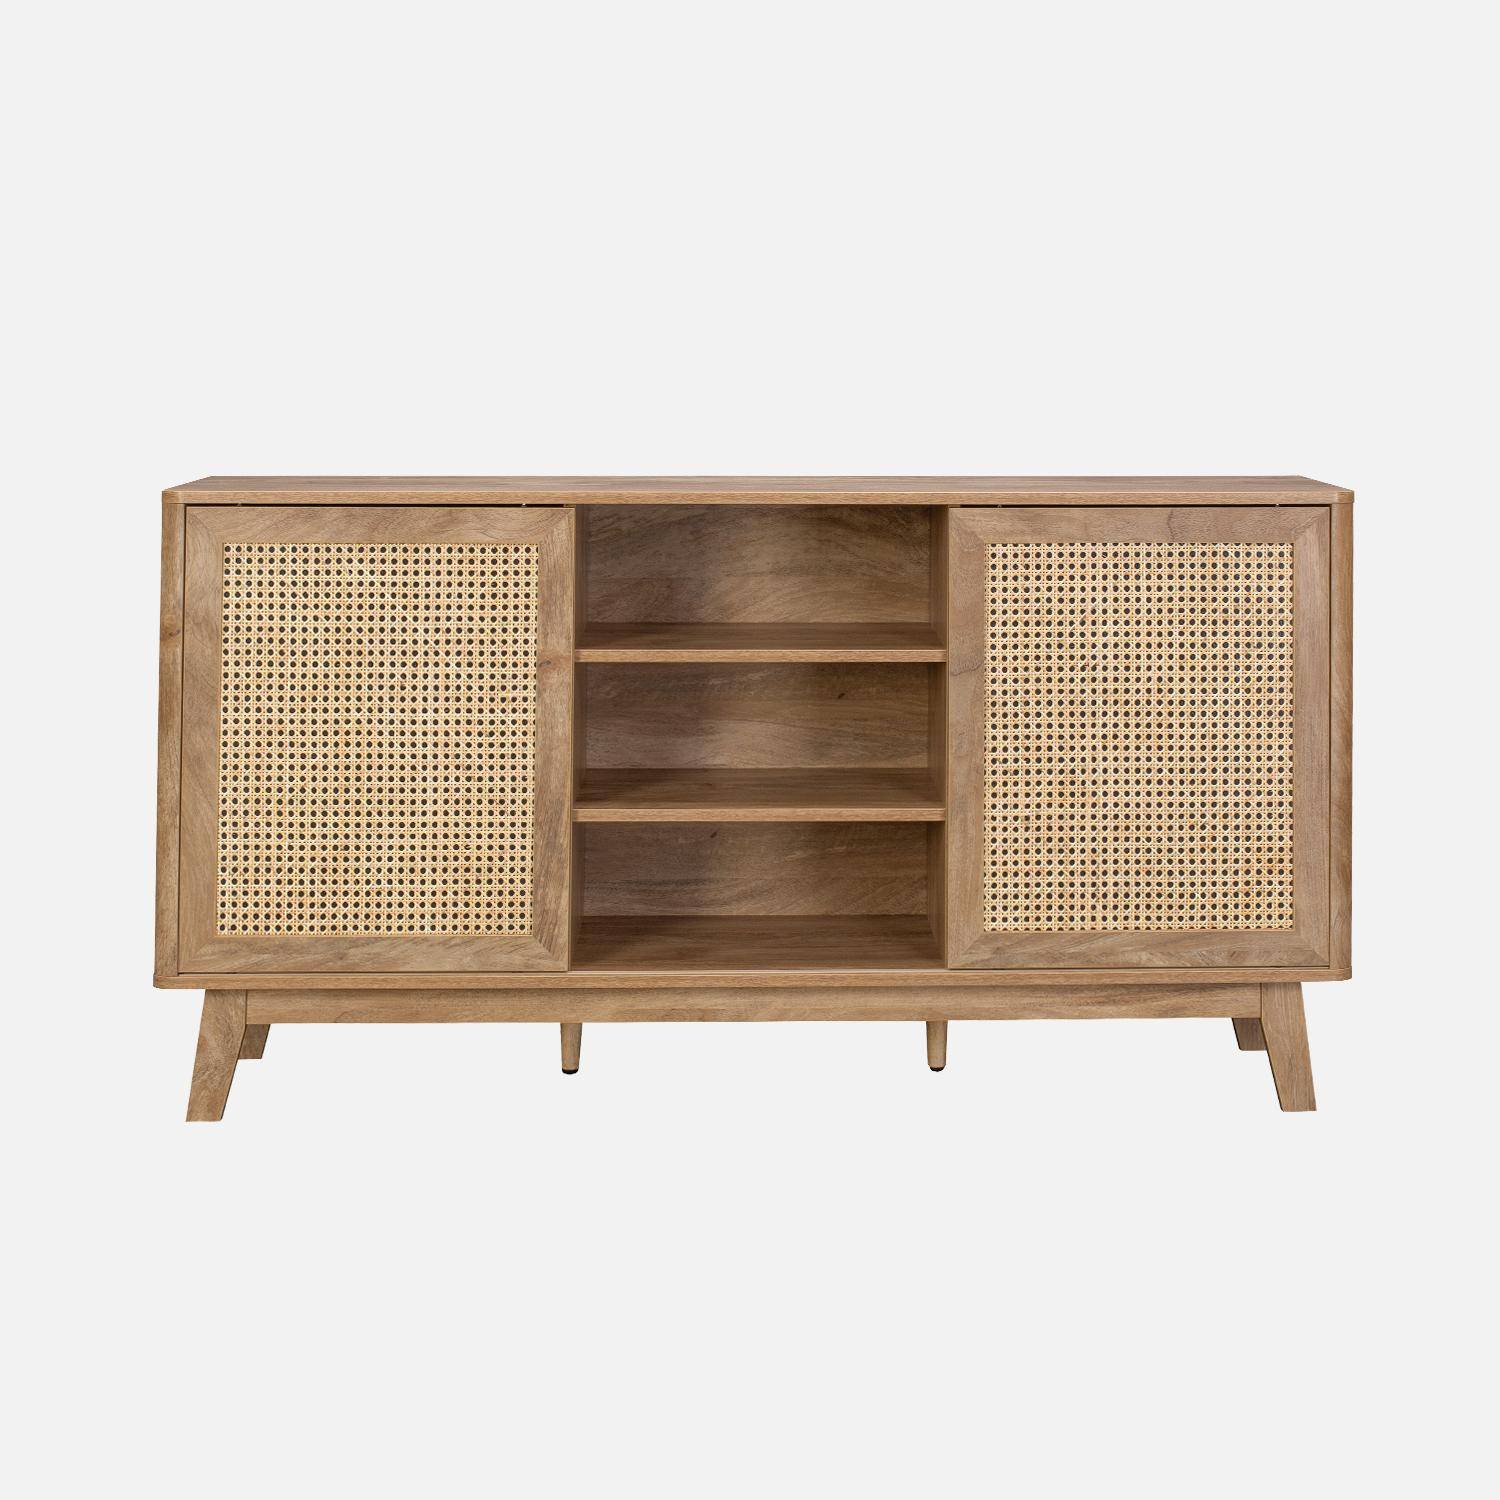 150cm sideboard with 2 sliding doors and shelves, wood effect and cane detail  Photo2